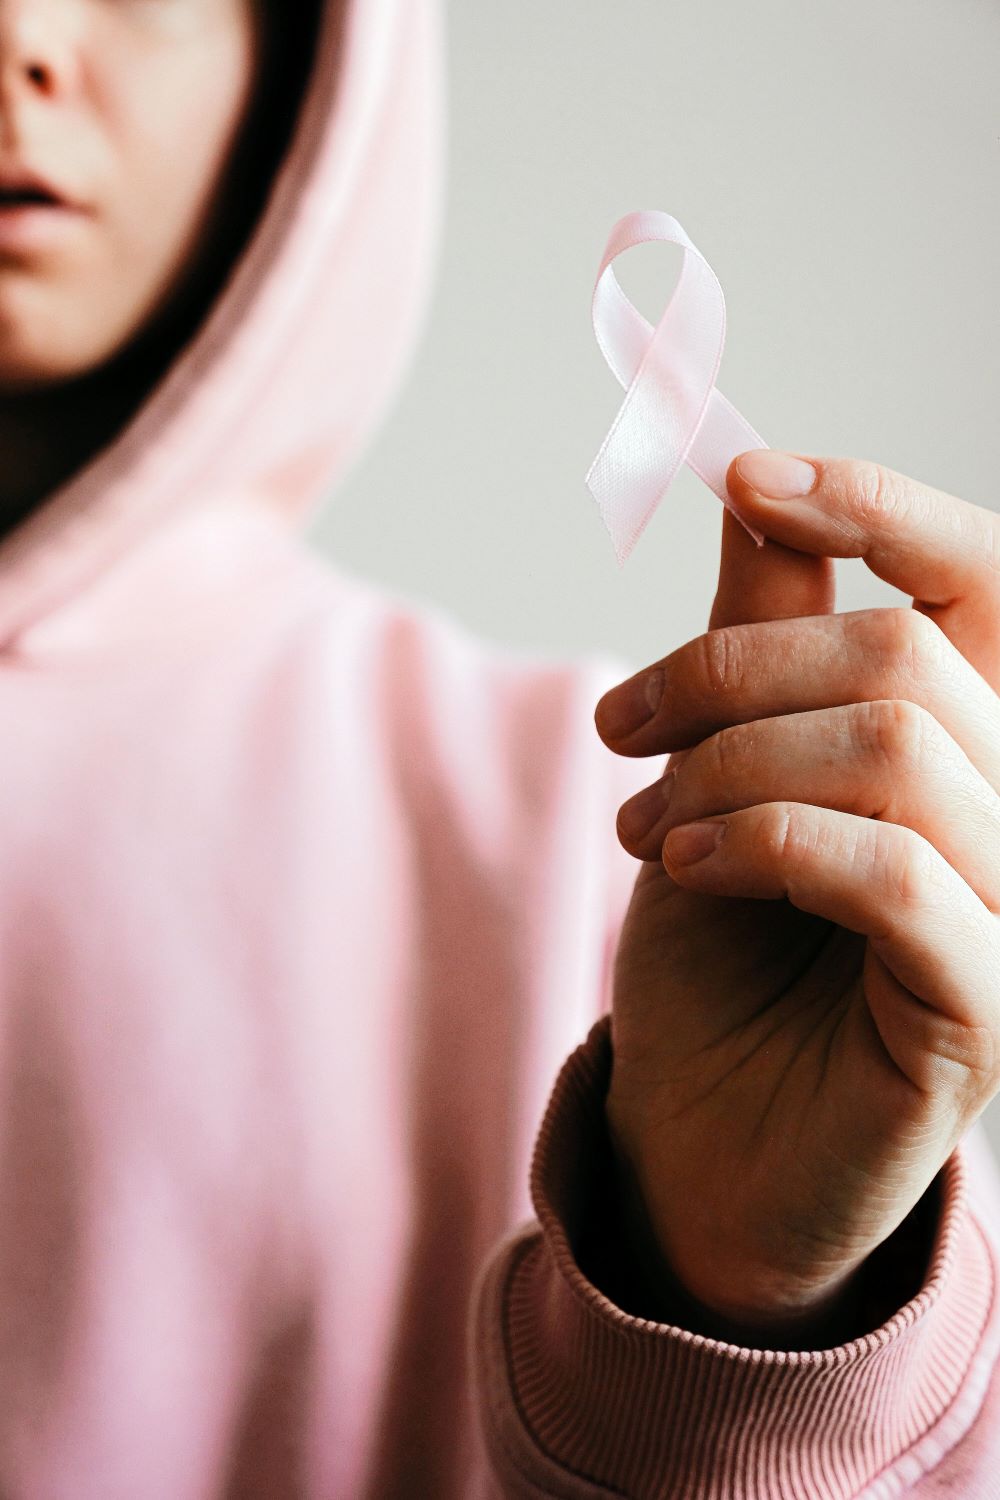 Breast Cancer Reconstructive Surgery & Its Impact on Mental Health